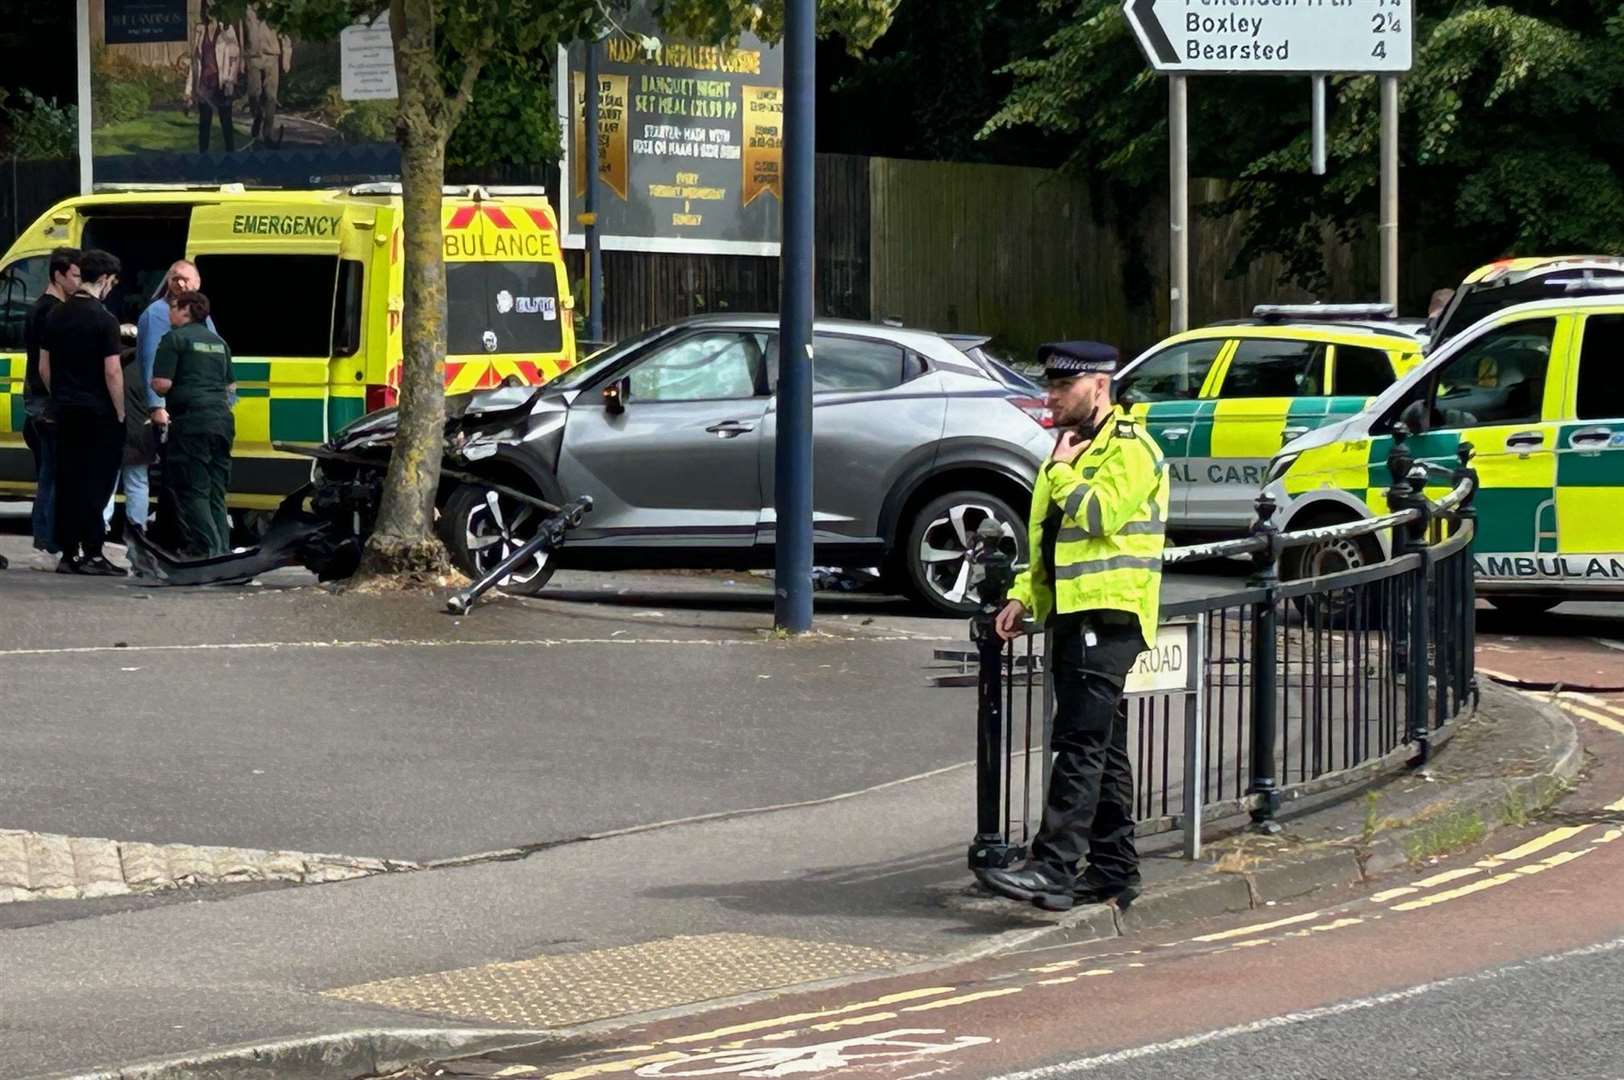 The accident took place at the junction of Sandling Road and Lower Boxley Road in Maidstone